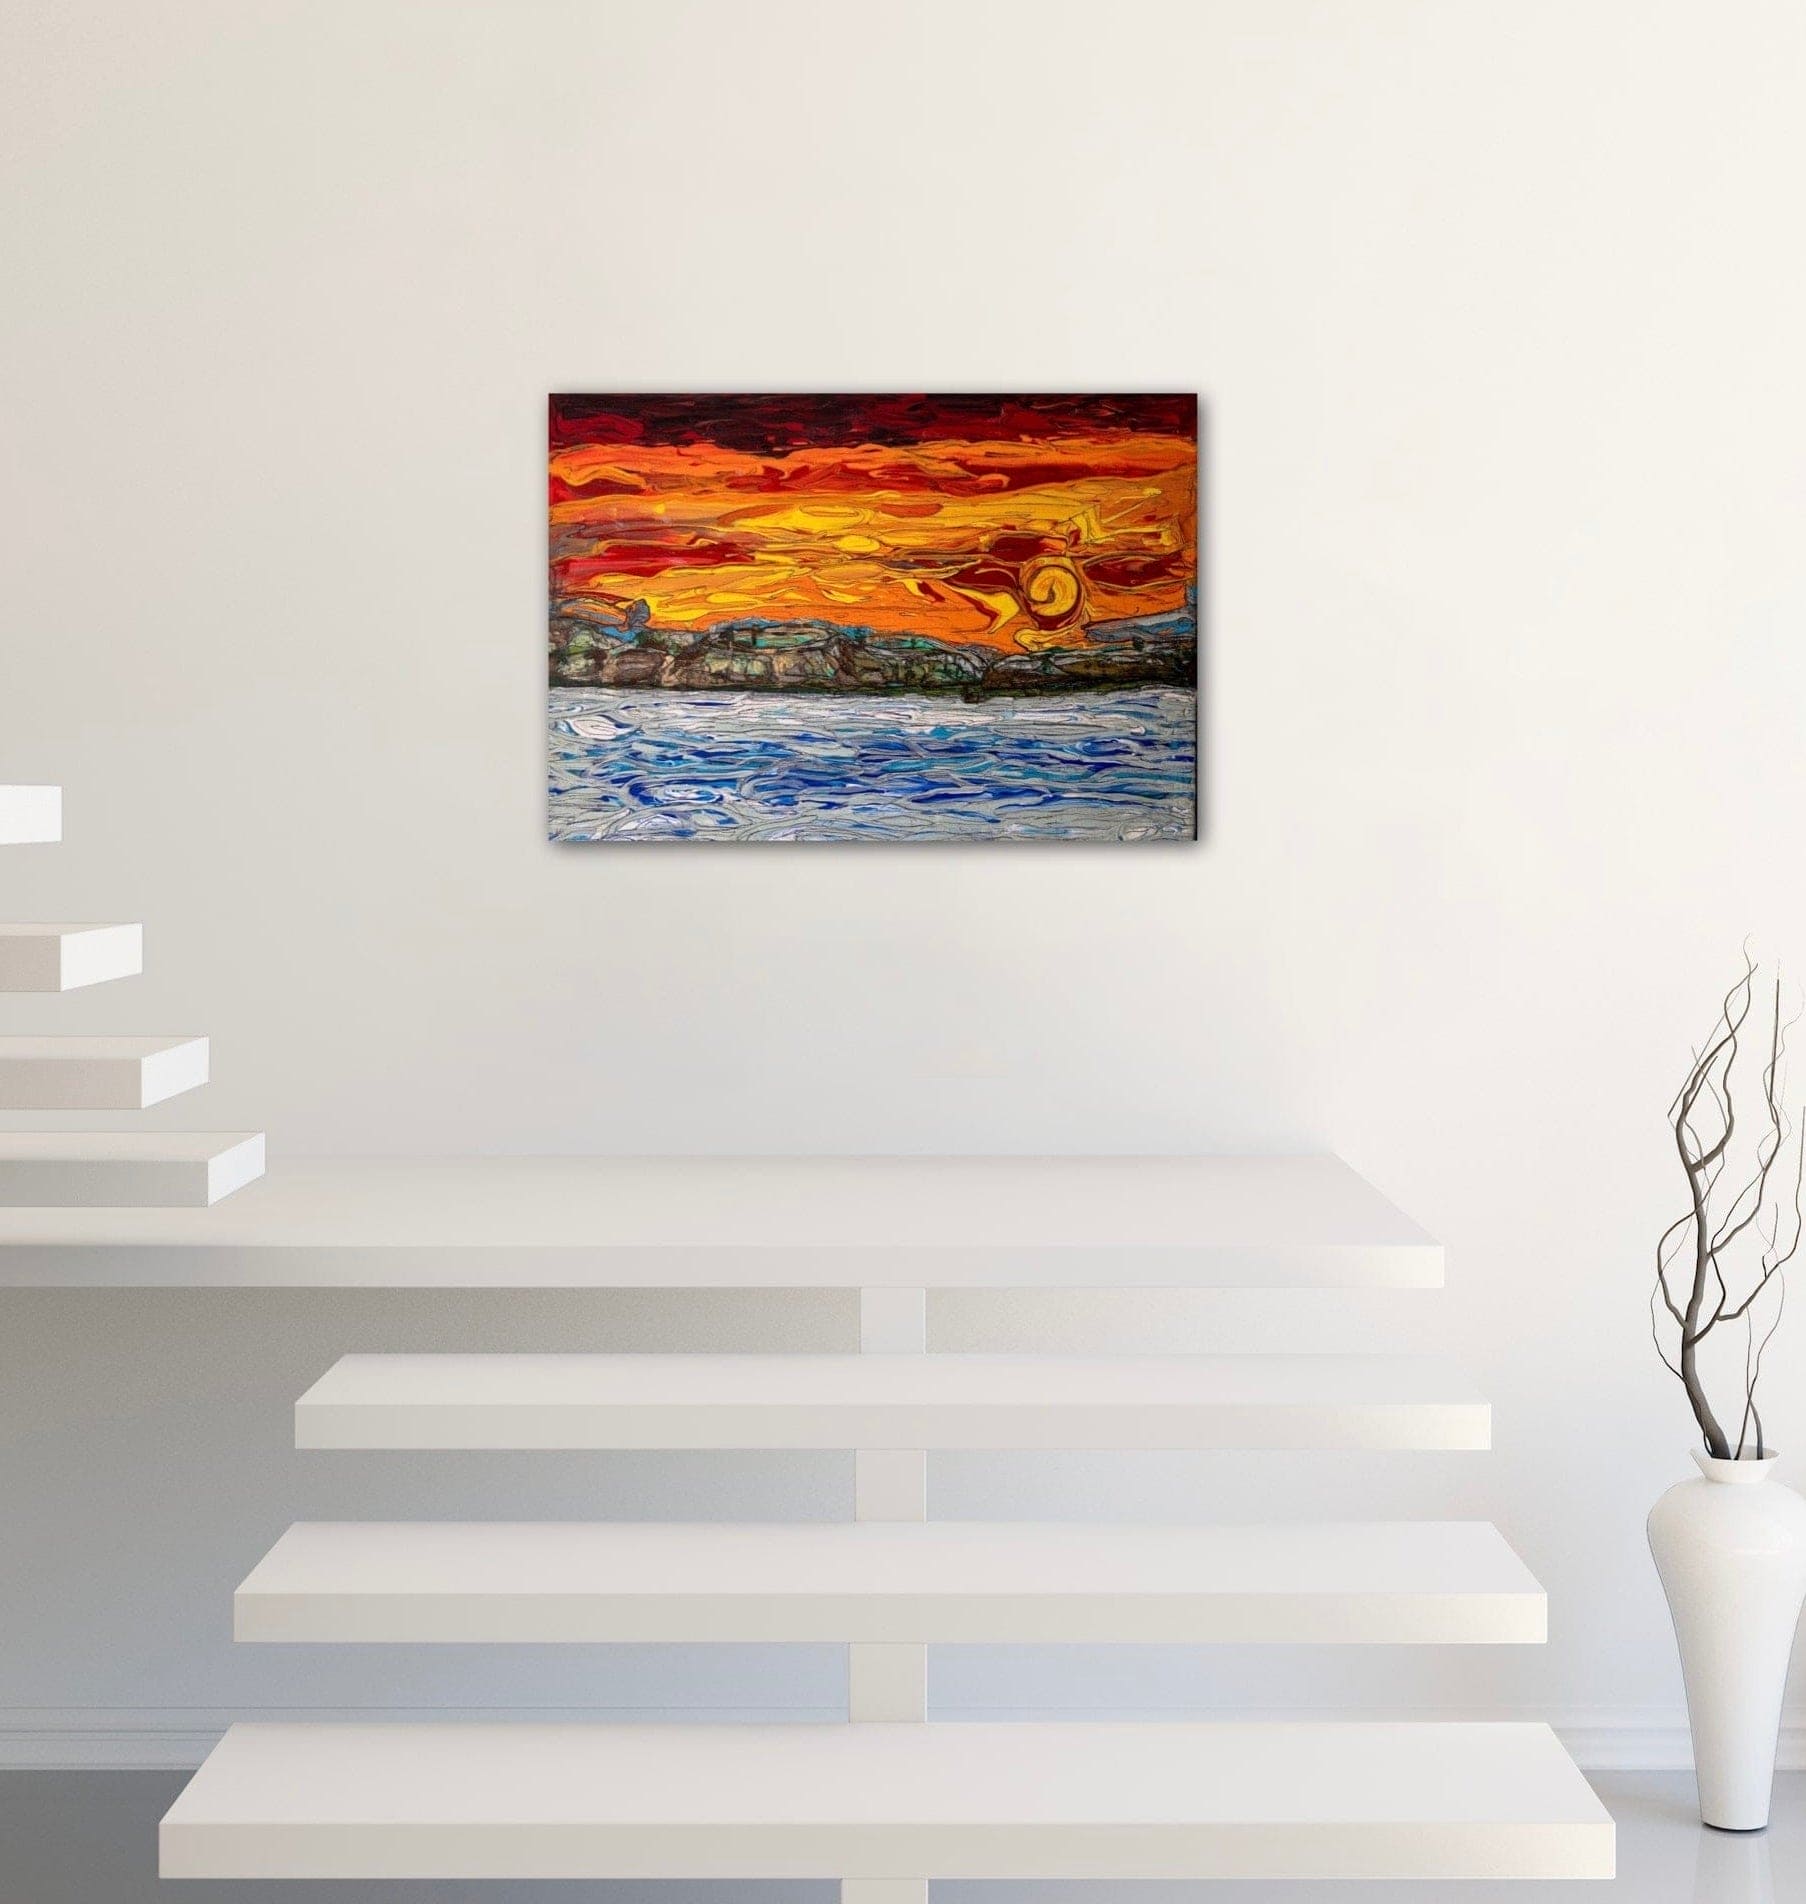 Under The Tuscan Sun - Small Size, Textured, Mixed Media Painting Of A Orange Sky, Sun, Land And Ocean/Lake, Original Design Wall Art, by Art With Evie